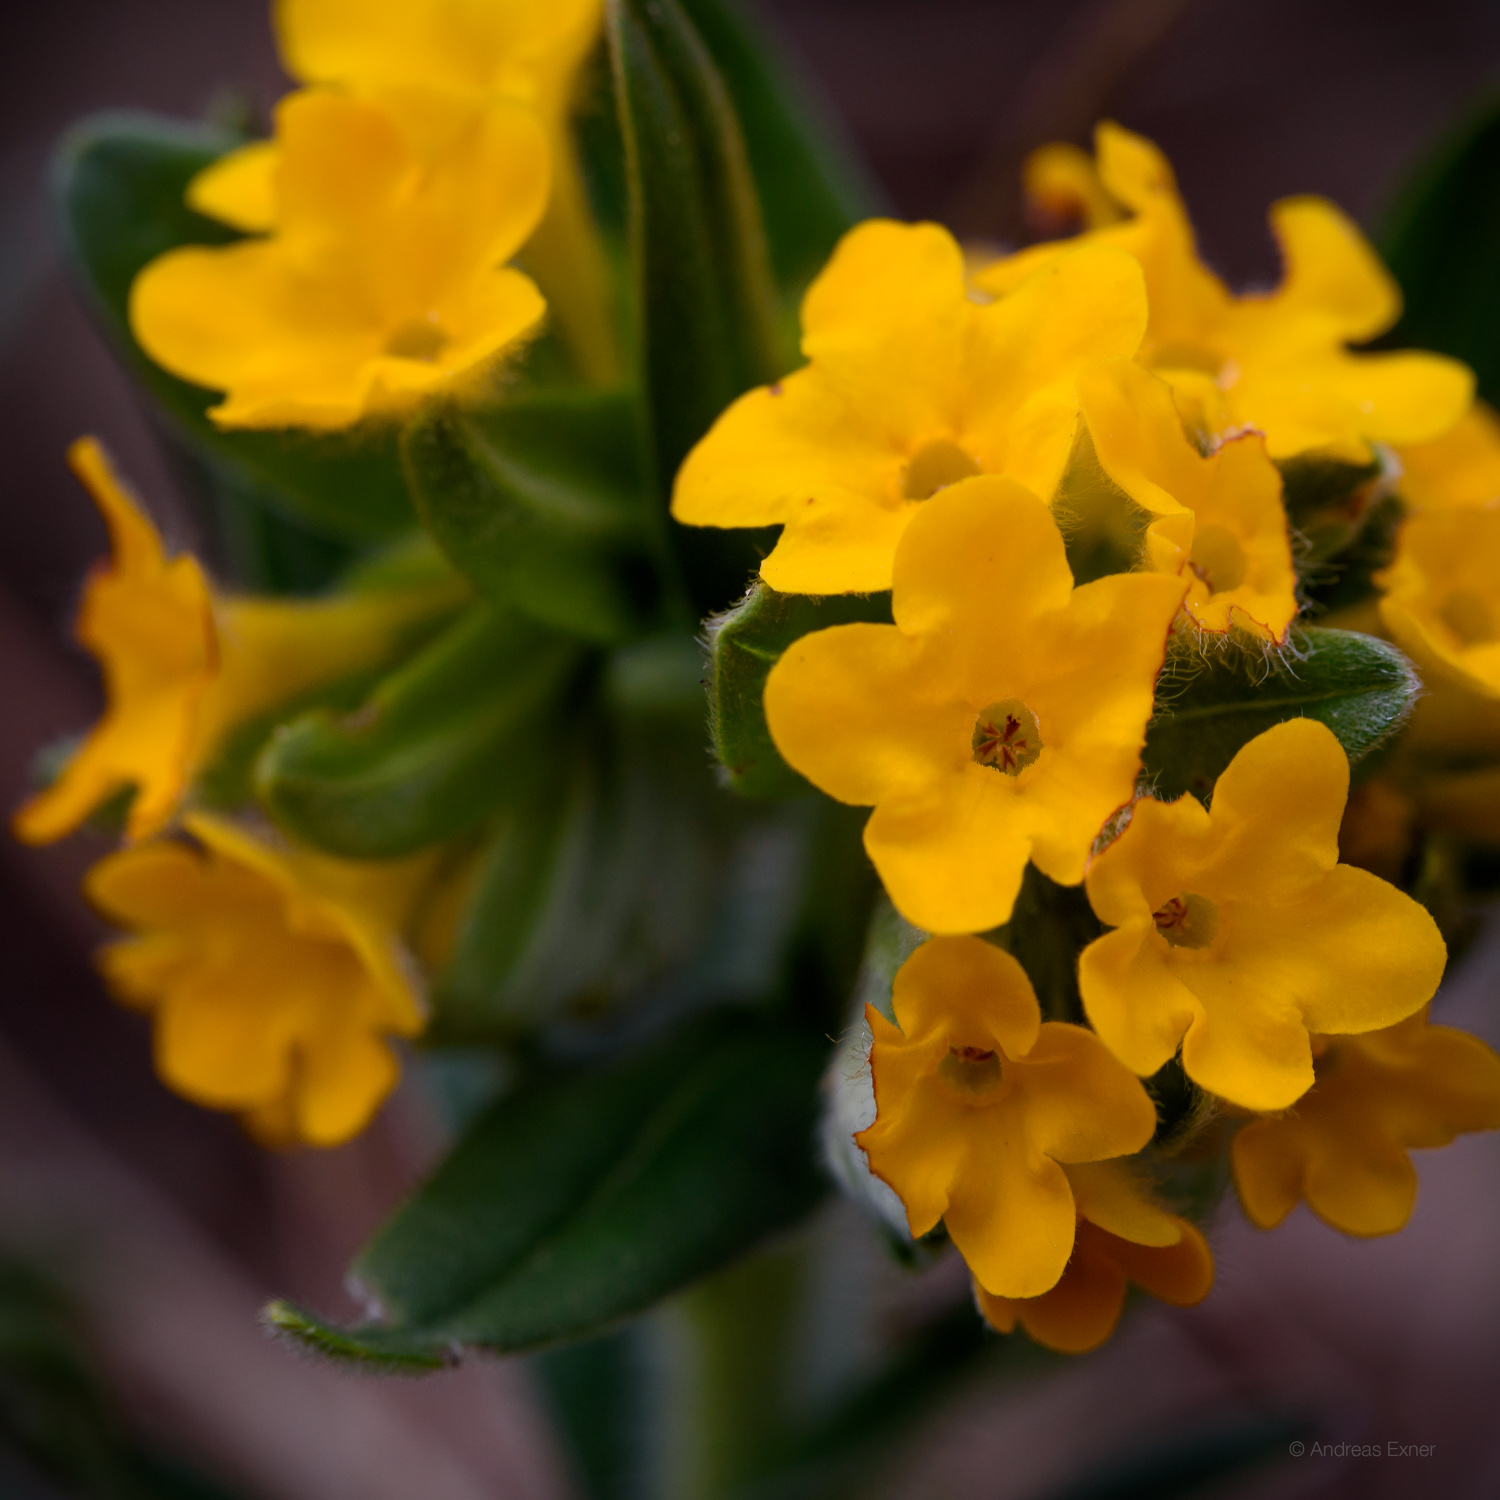 Hairy Puccoon